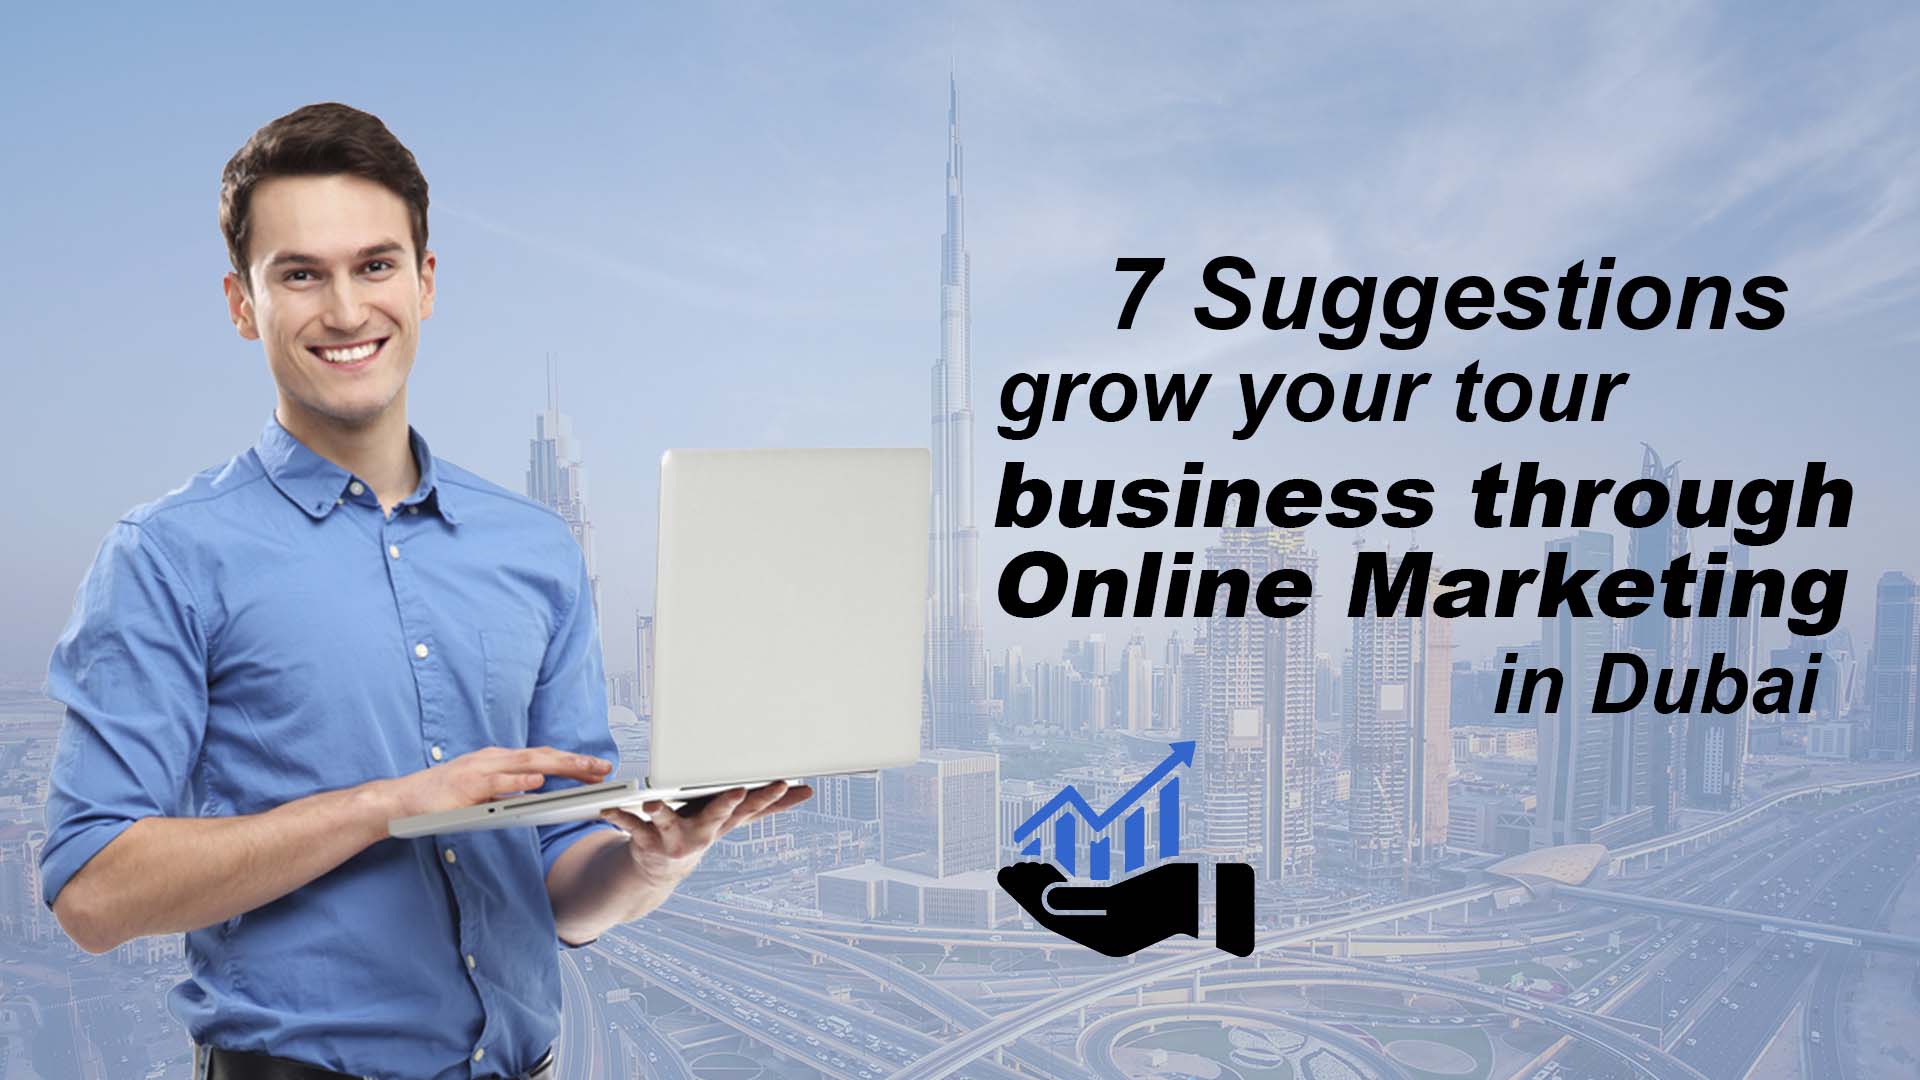 7 Suggestions to grow your tour business through Online Marketing in Dubai | Emirates Infohub